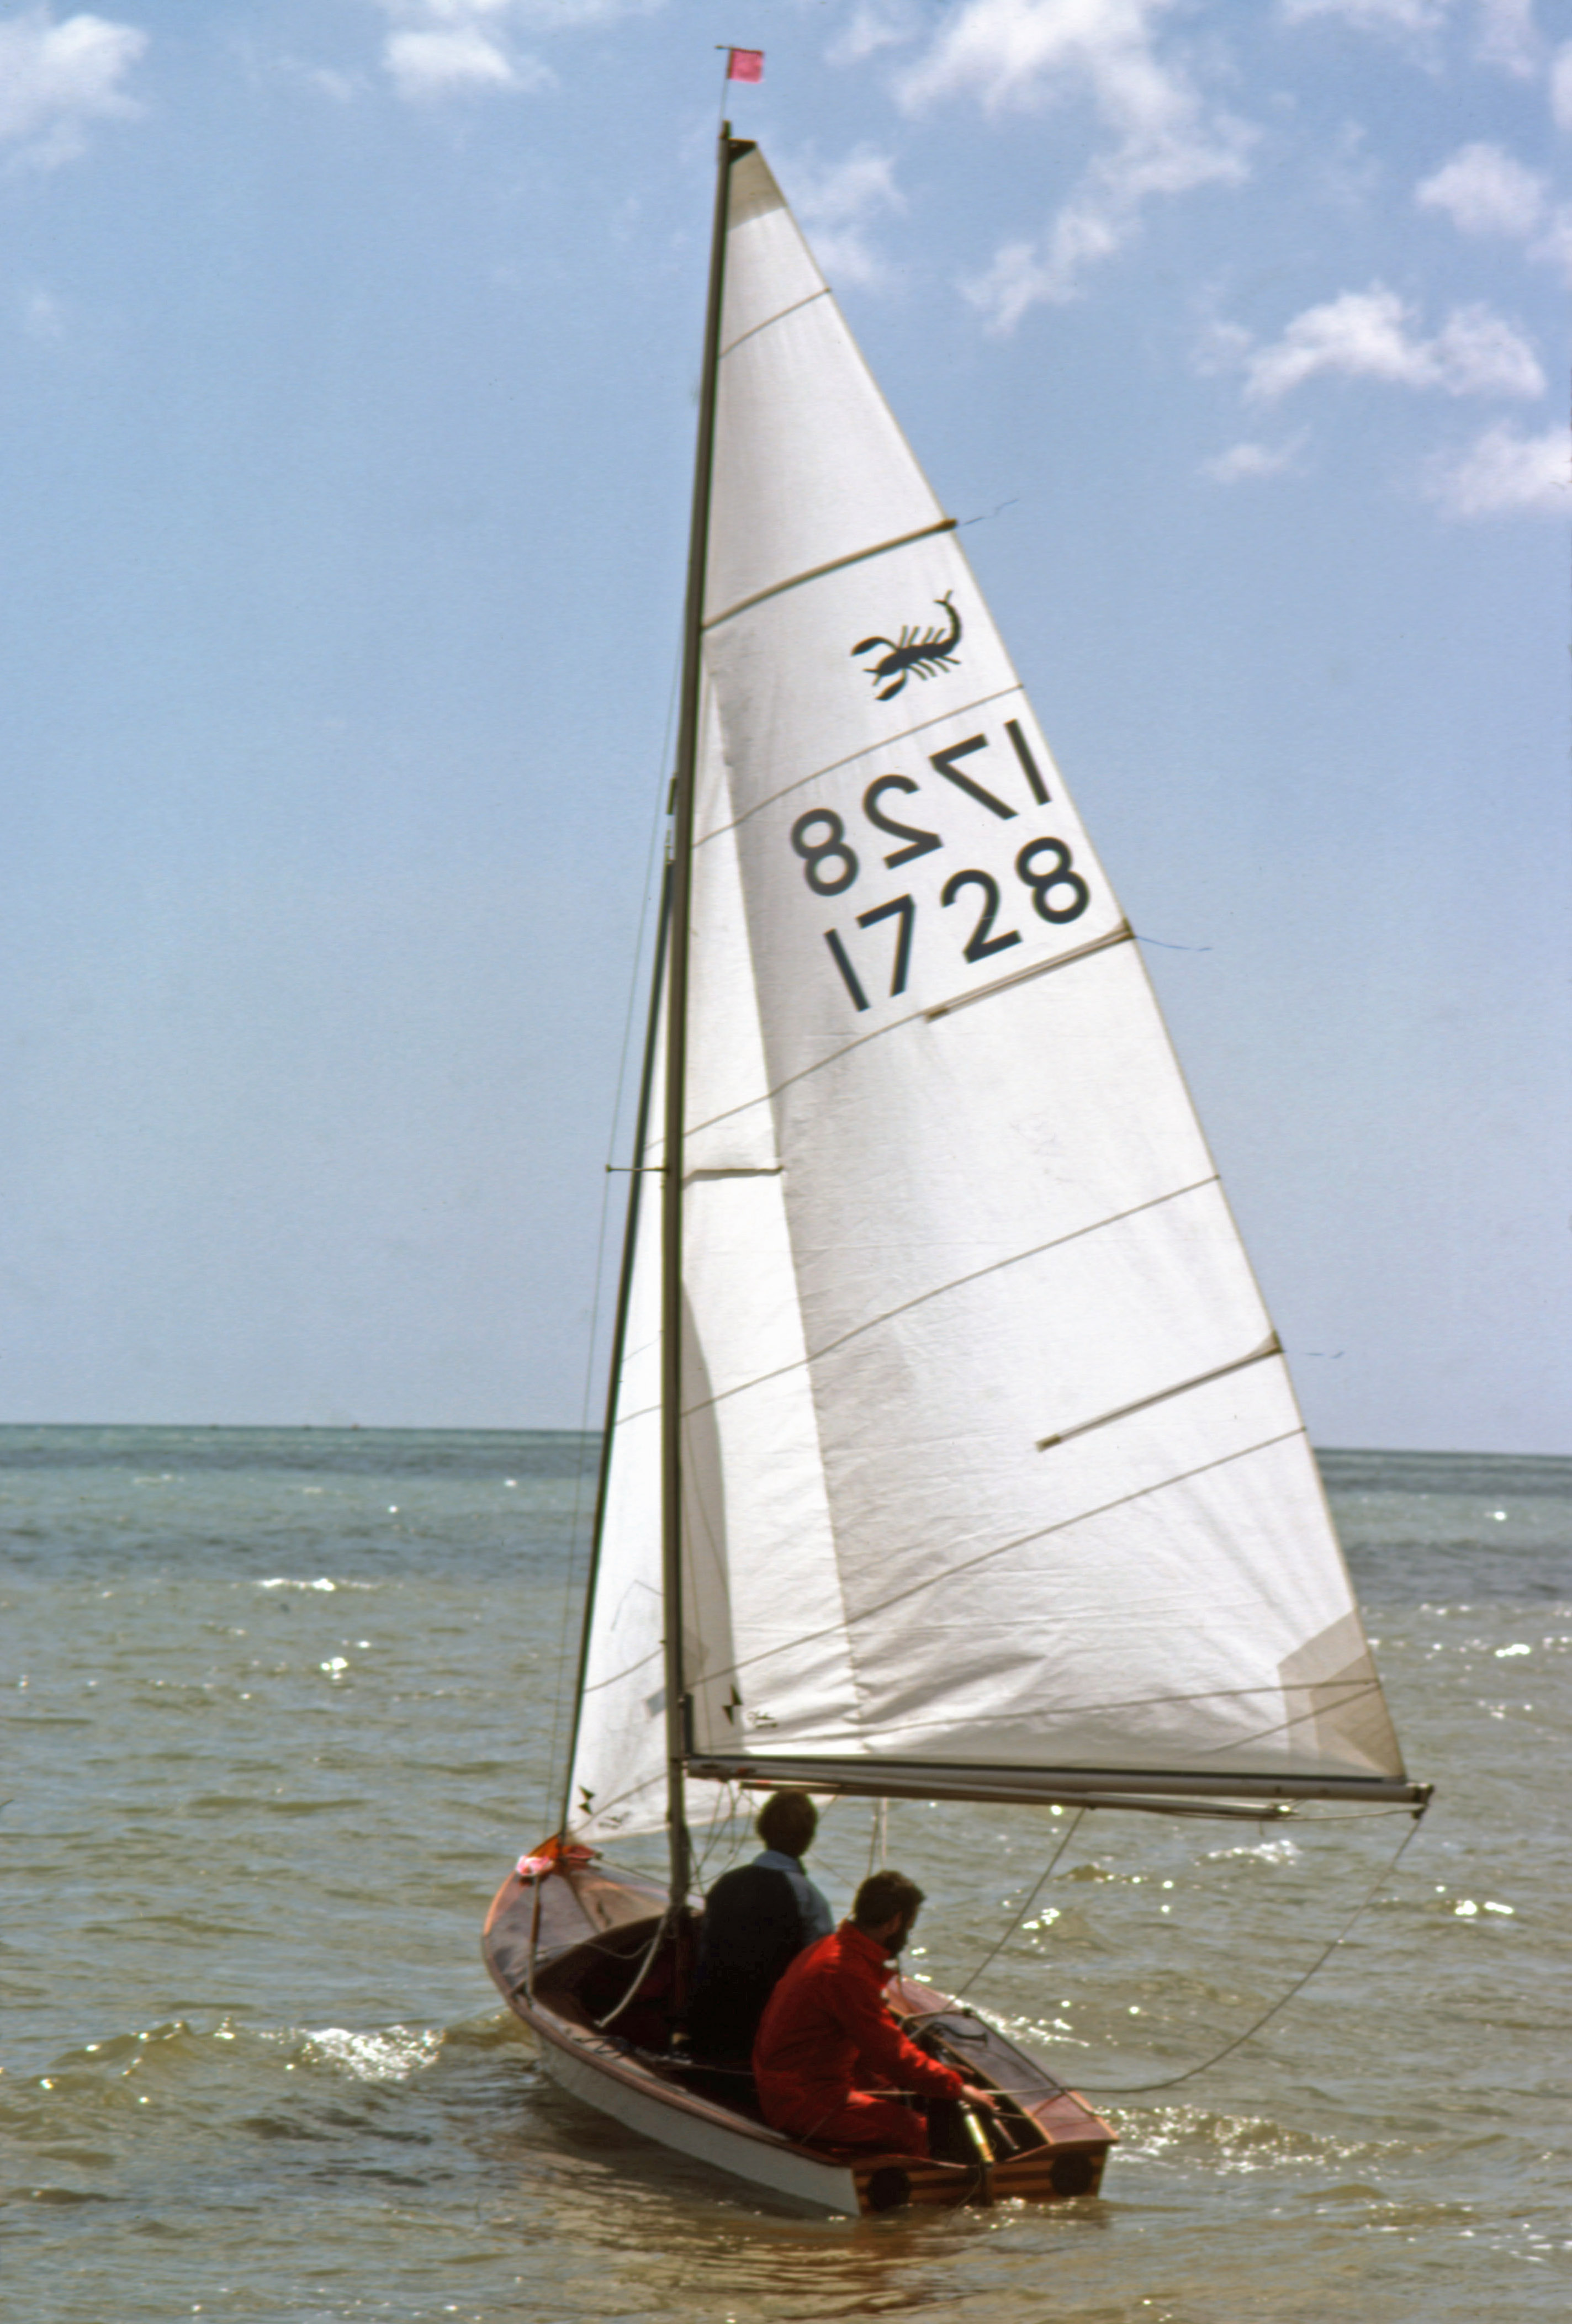 7906707 June 1979 - Jim Thompson, who sold Elizabeth Scorpion 1728 this month, is at the helm.